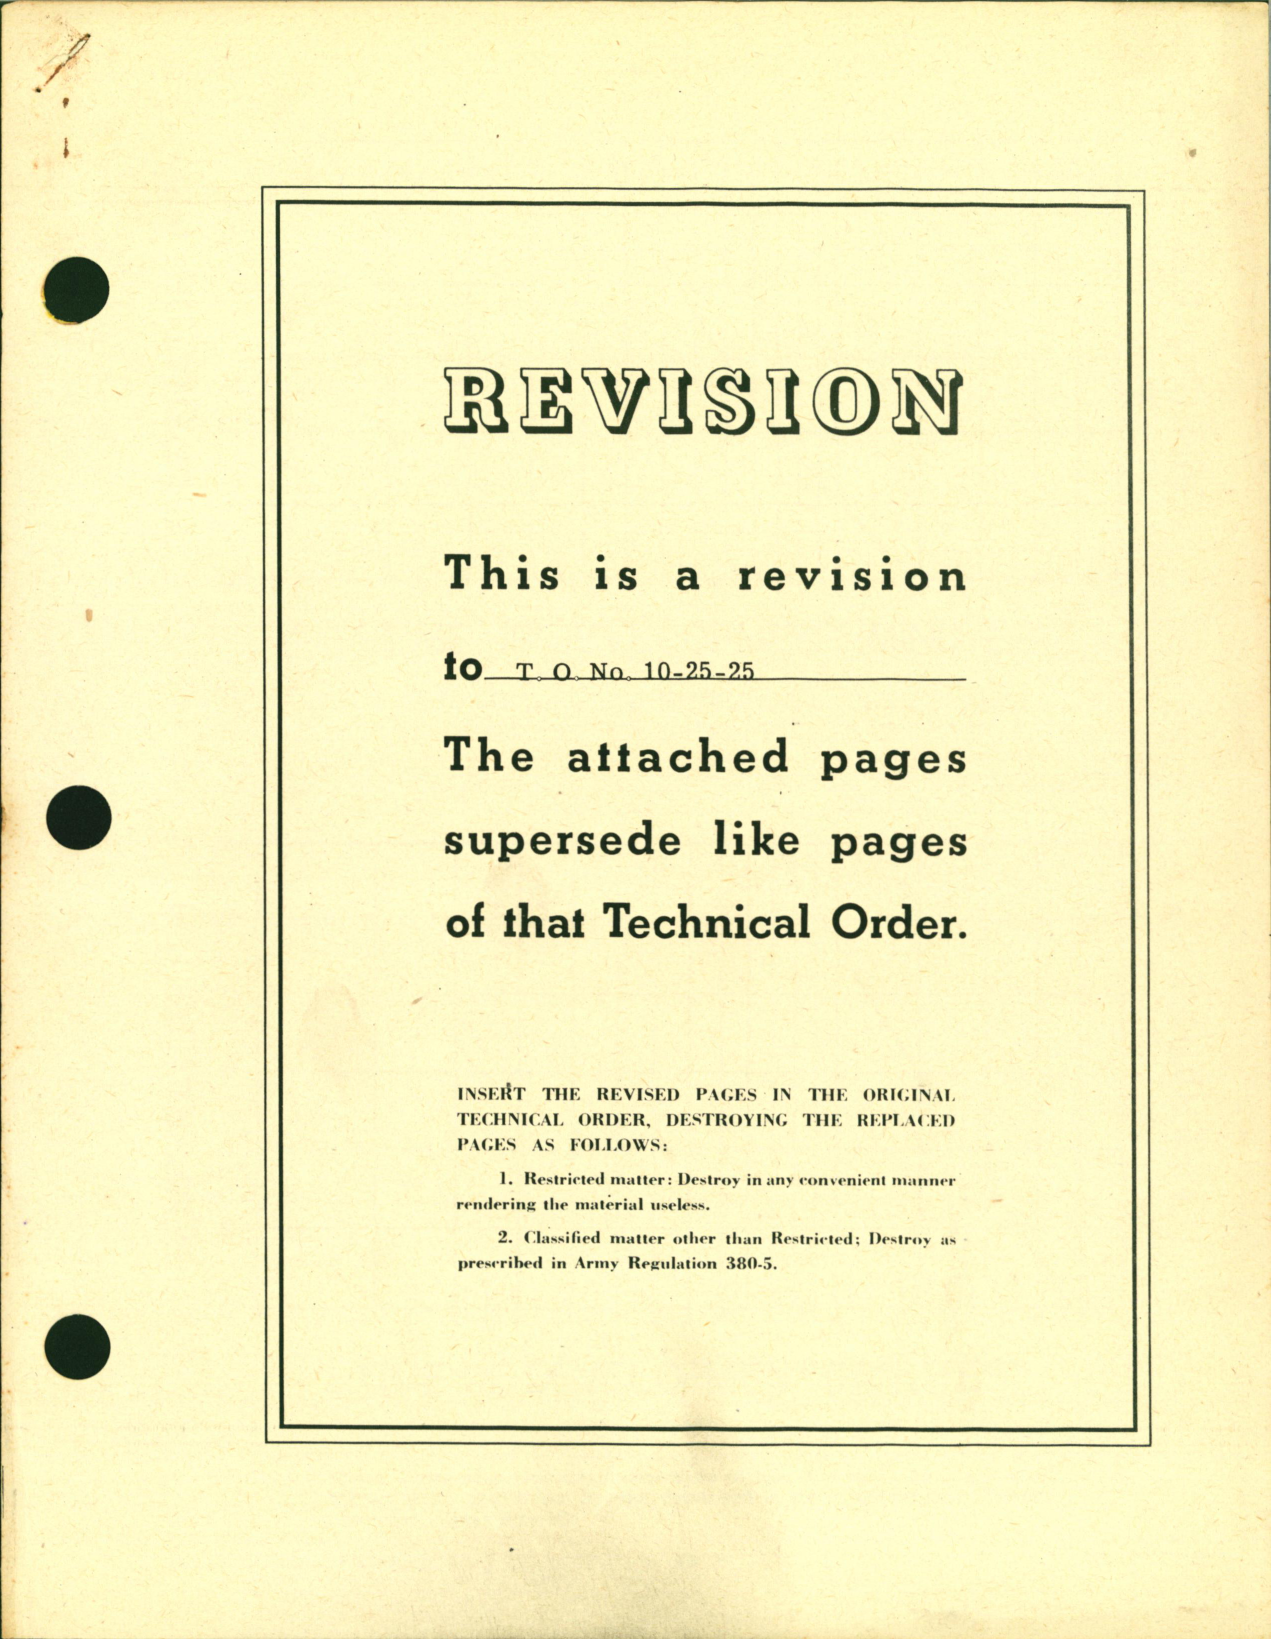 Sample page 1 from AirCorps Library document: Handbook of Instructions with Parts Catalog for Type G-3 Film Developer